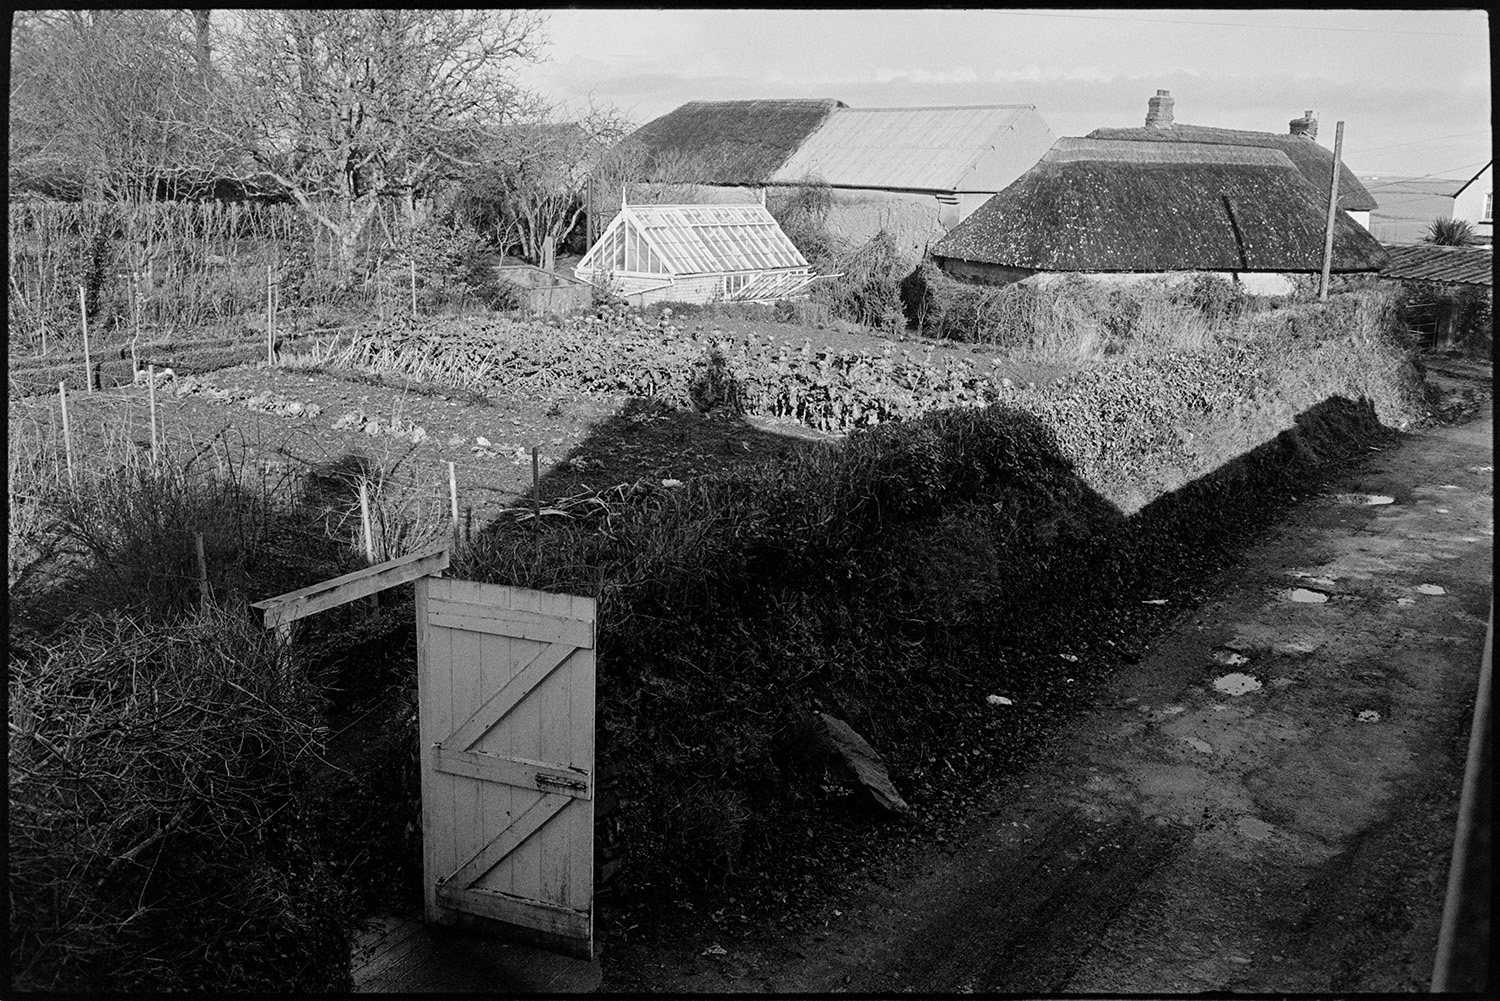 Buildings in Arts Centre gardens. 
[A vegetable garden, greenhouse and thatched buildings at the Beaford Centre at Greenwarren House, Beaford.]